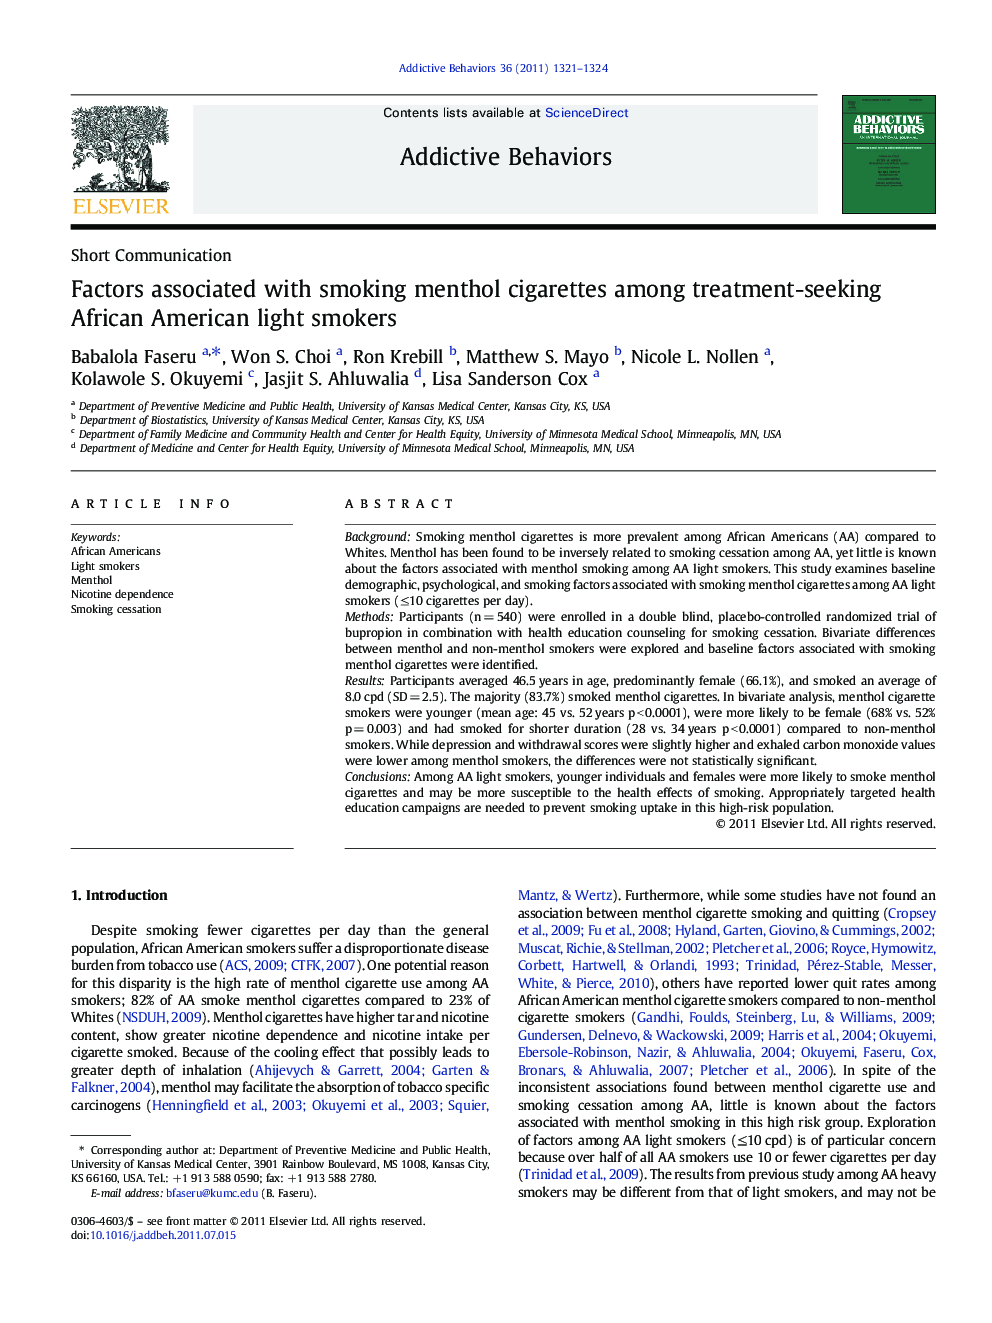 Factors associated with smoking menthol cigarettes among treatment-seeking African American light smokers